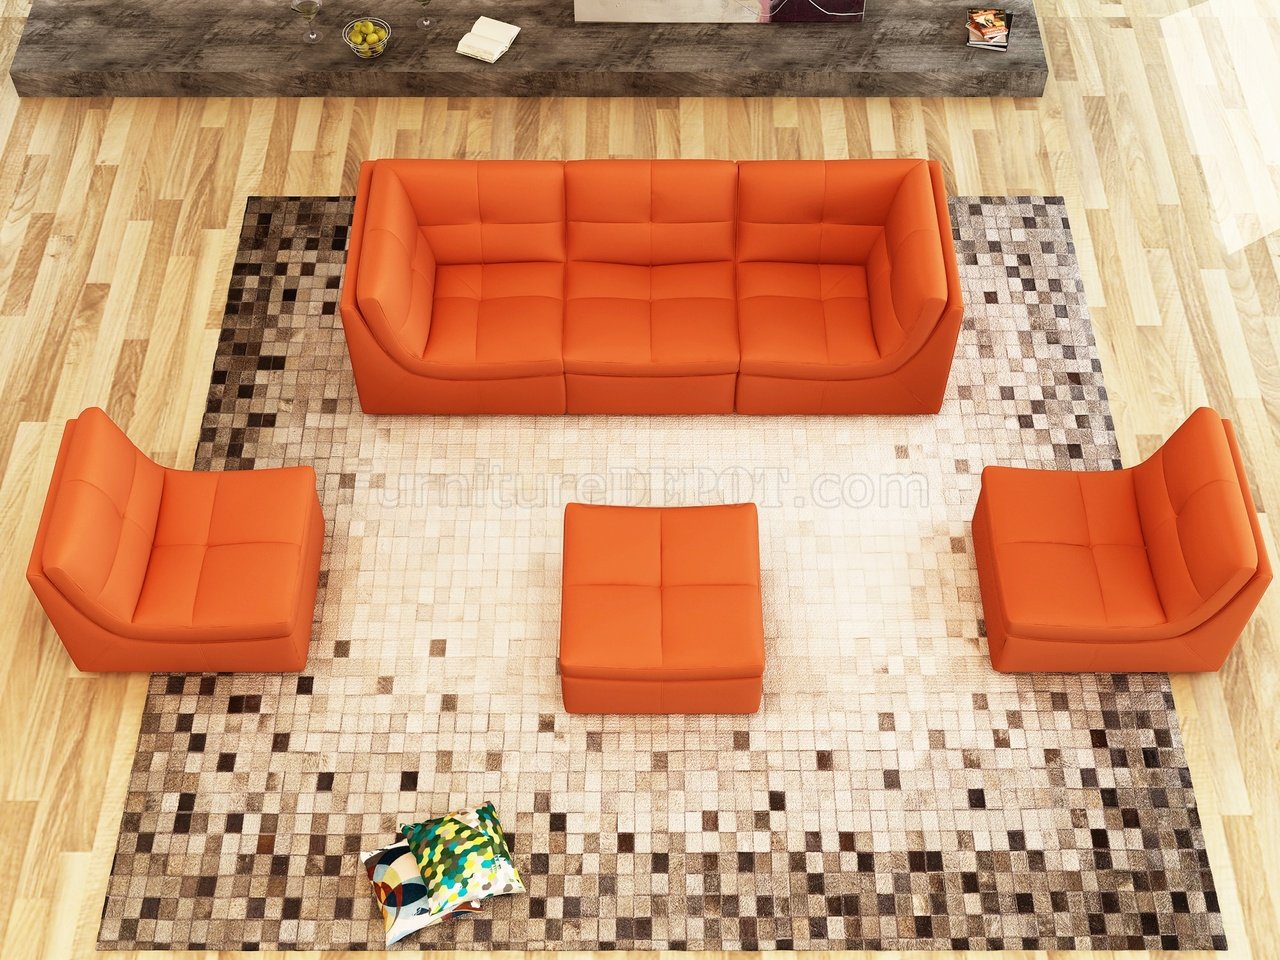 Lego Modular Sectional Sofa 6Pc Set in Pumpkin Leather by J&M - Click Image to Close